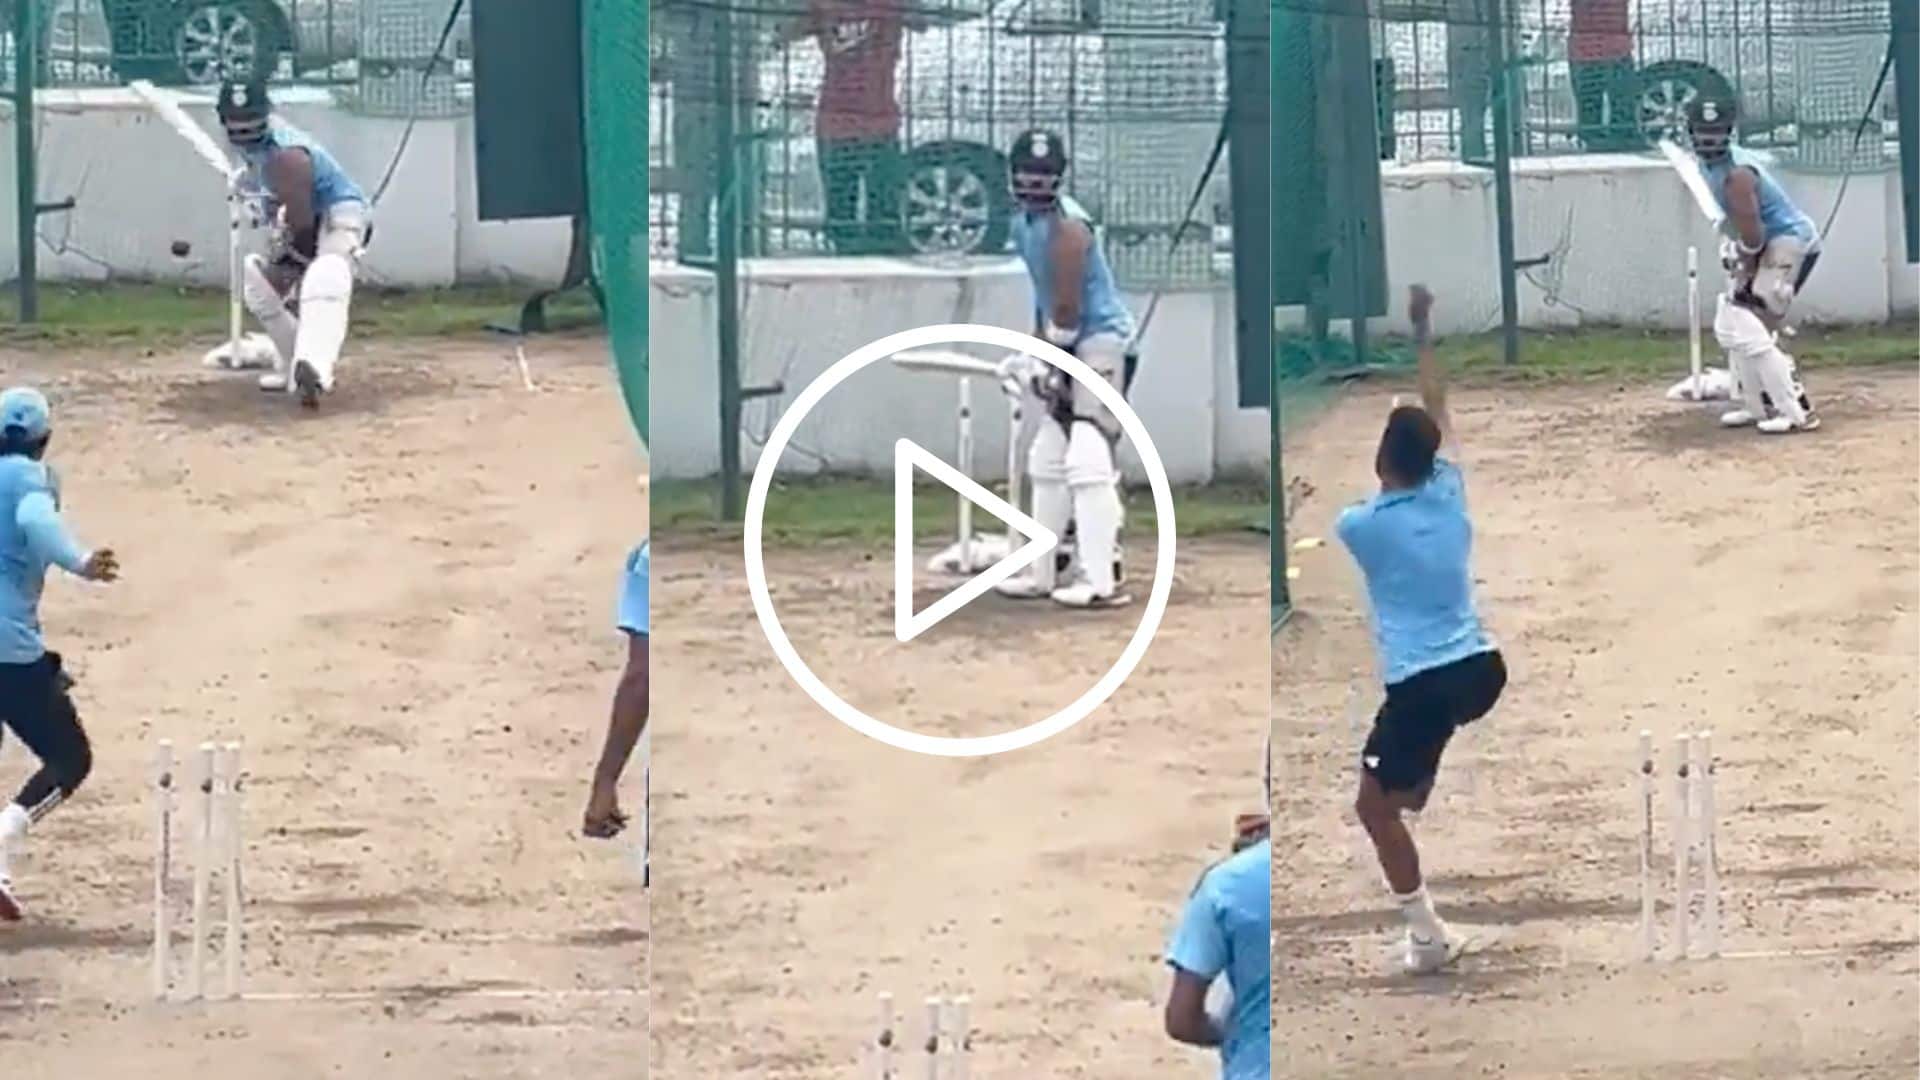 [WATCH] Virat Kohli Looks Unstoppable In The Recent Net Ahead Of Tests Against WI